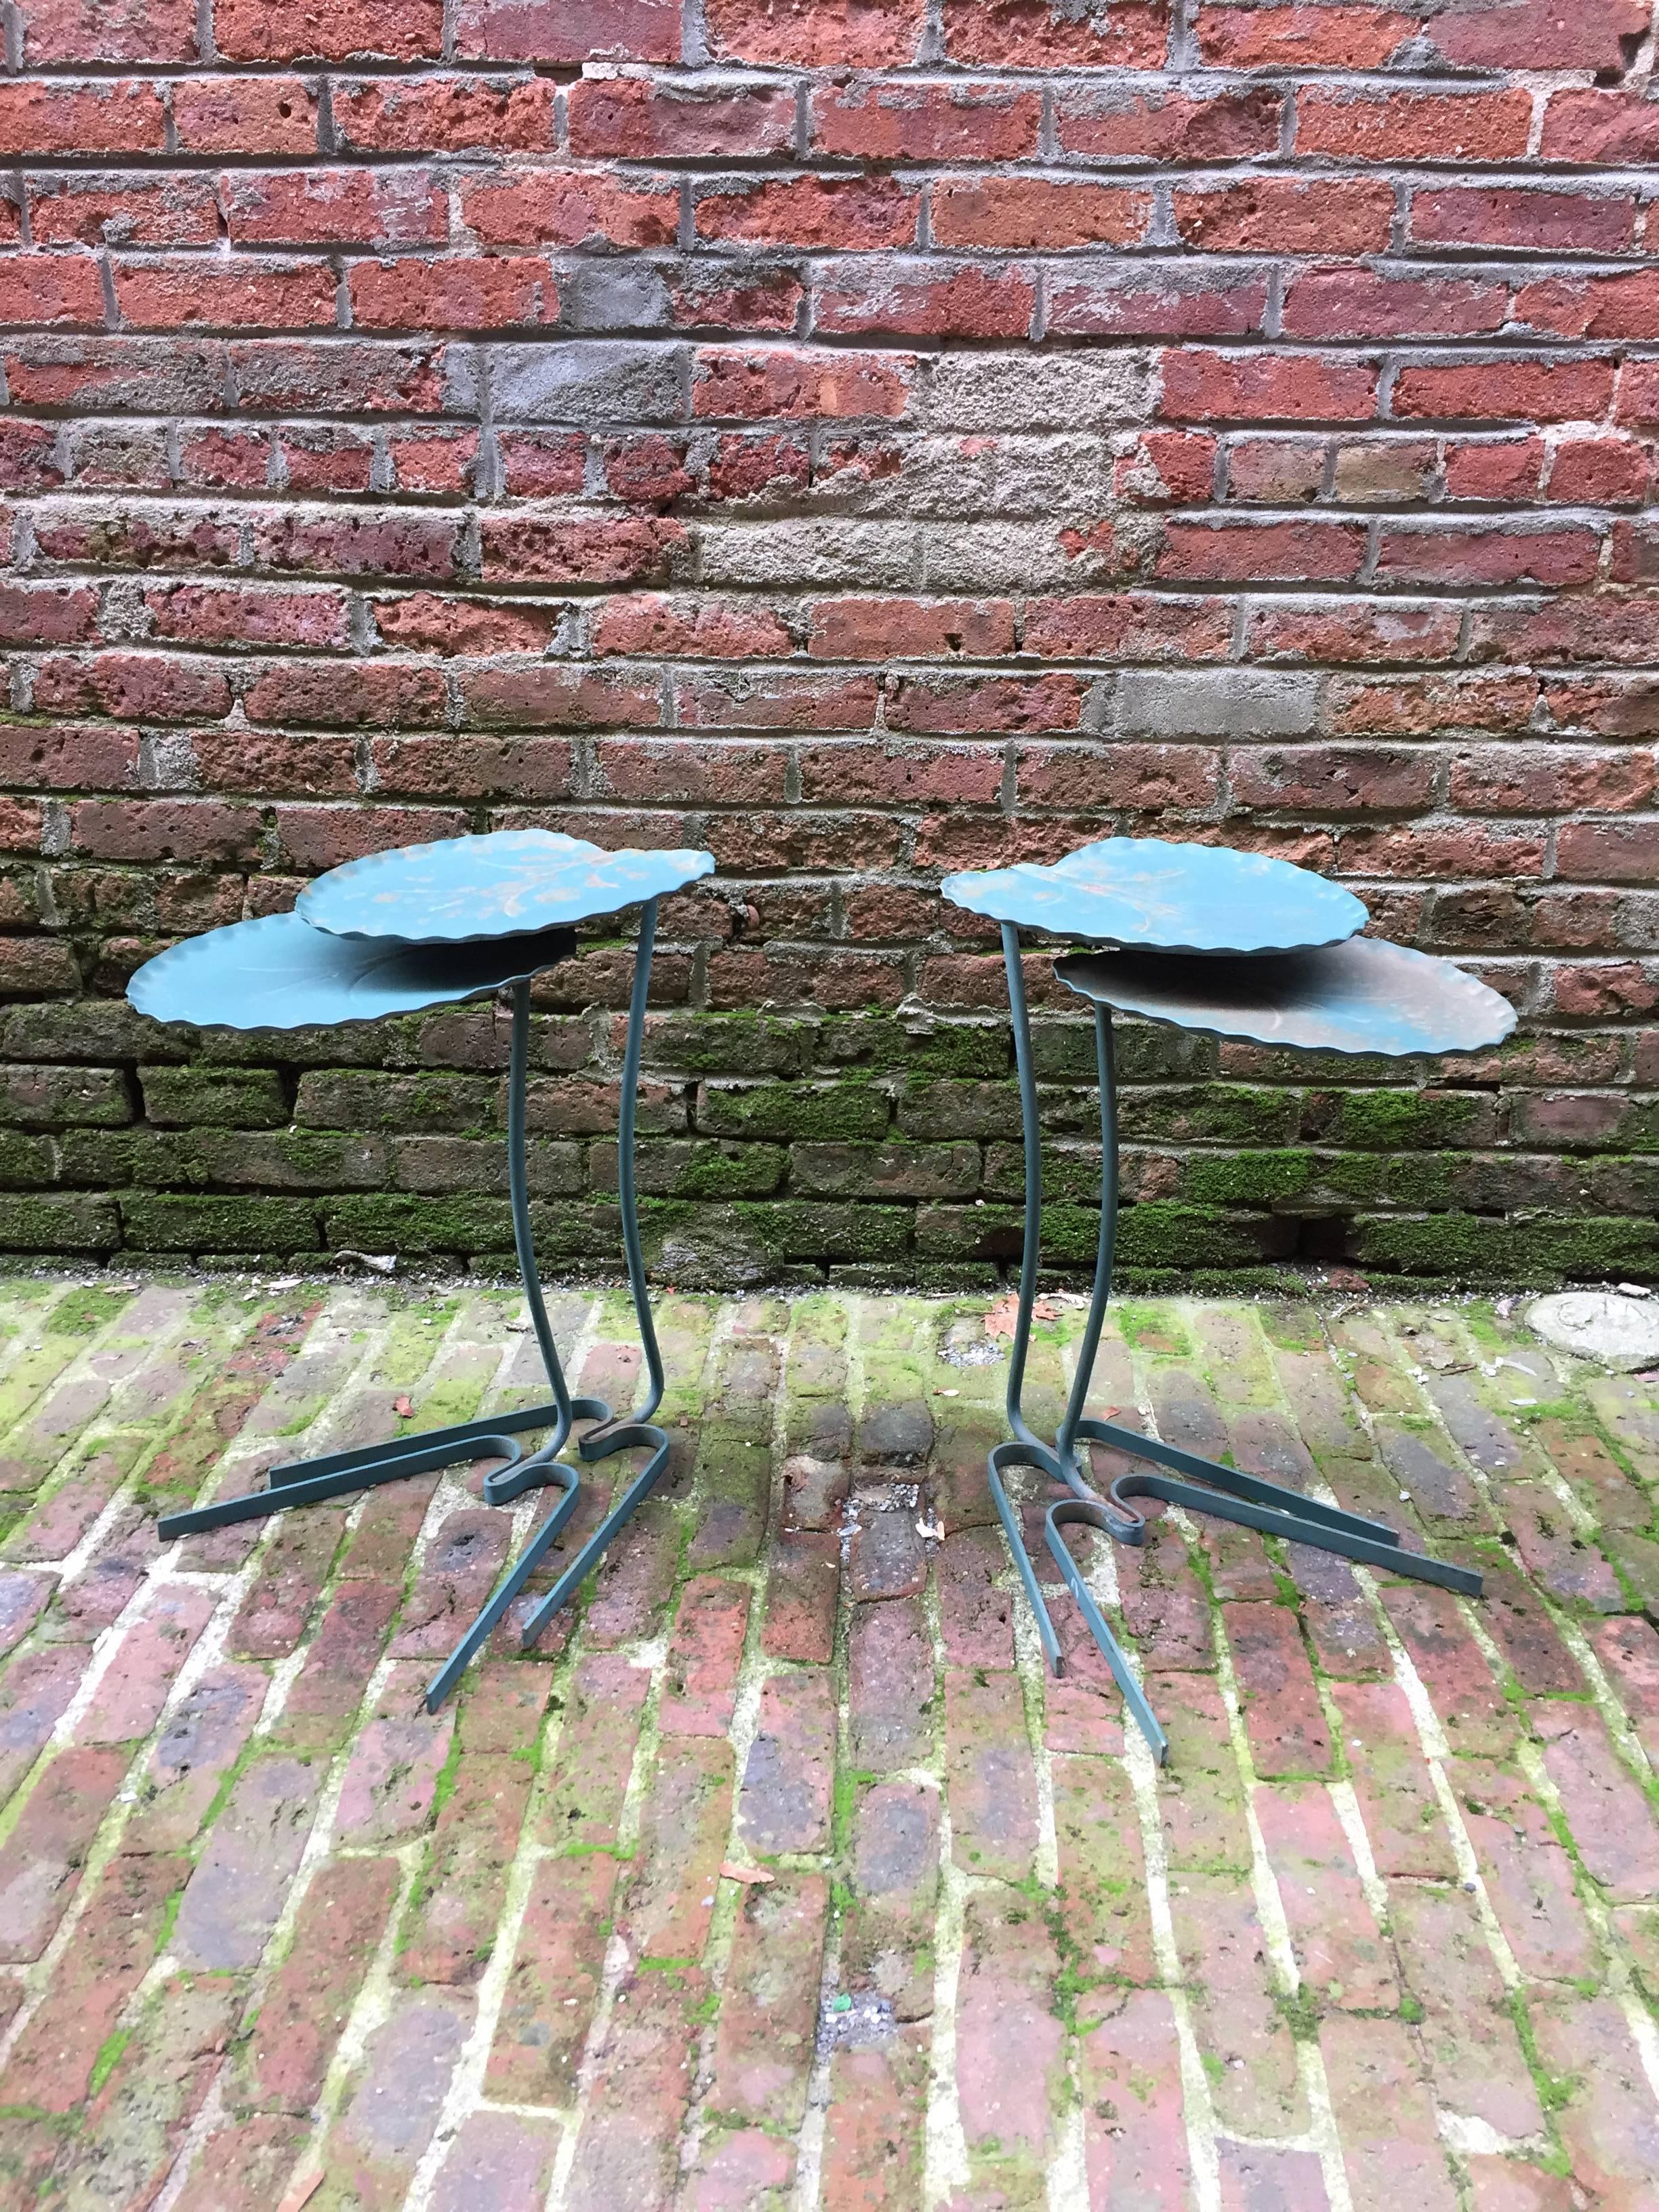 Two pairs of Salterini outdoor iron flora form tables, circa 1950-1960. These have clear Art Nouveau inspiration with a very modern flair. Original green paint. Structurally sound and in good, original condition. They nest together or can separate